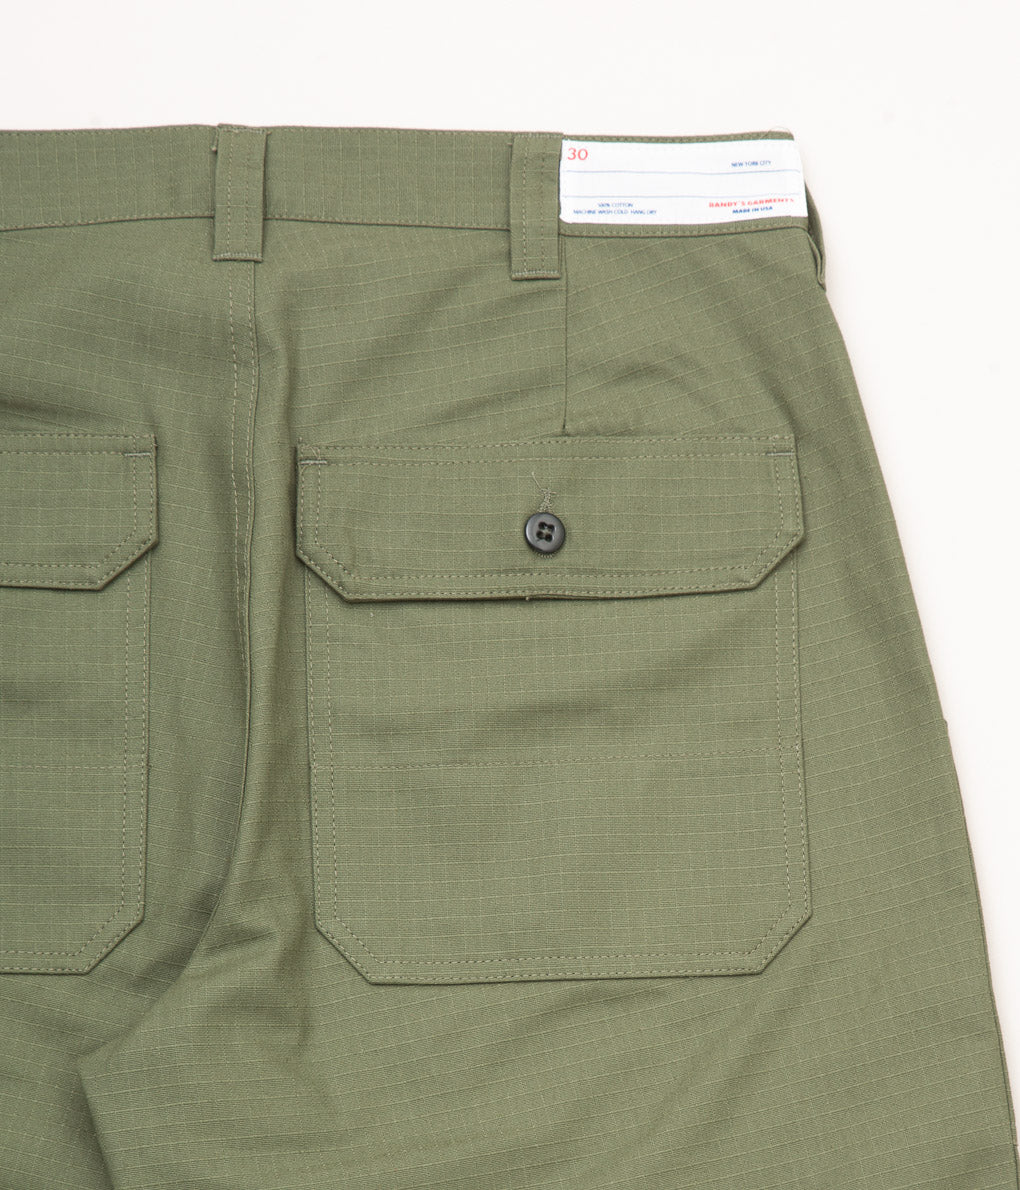 RANDY'S GARMENTS "UTILITY PANT"(OLIVE RIPSTOP)